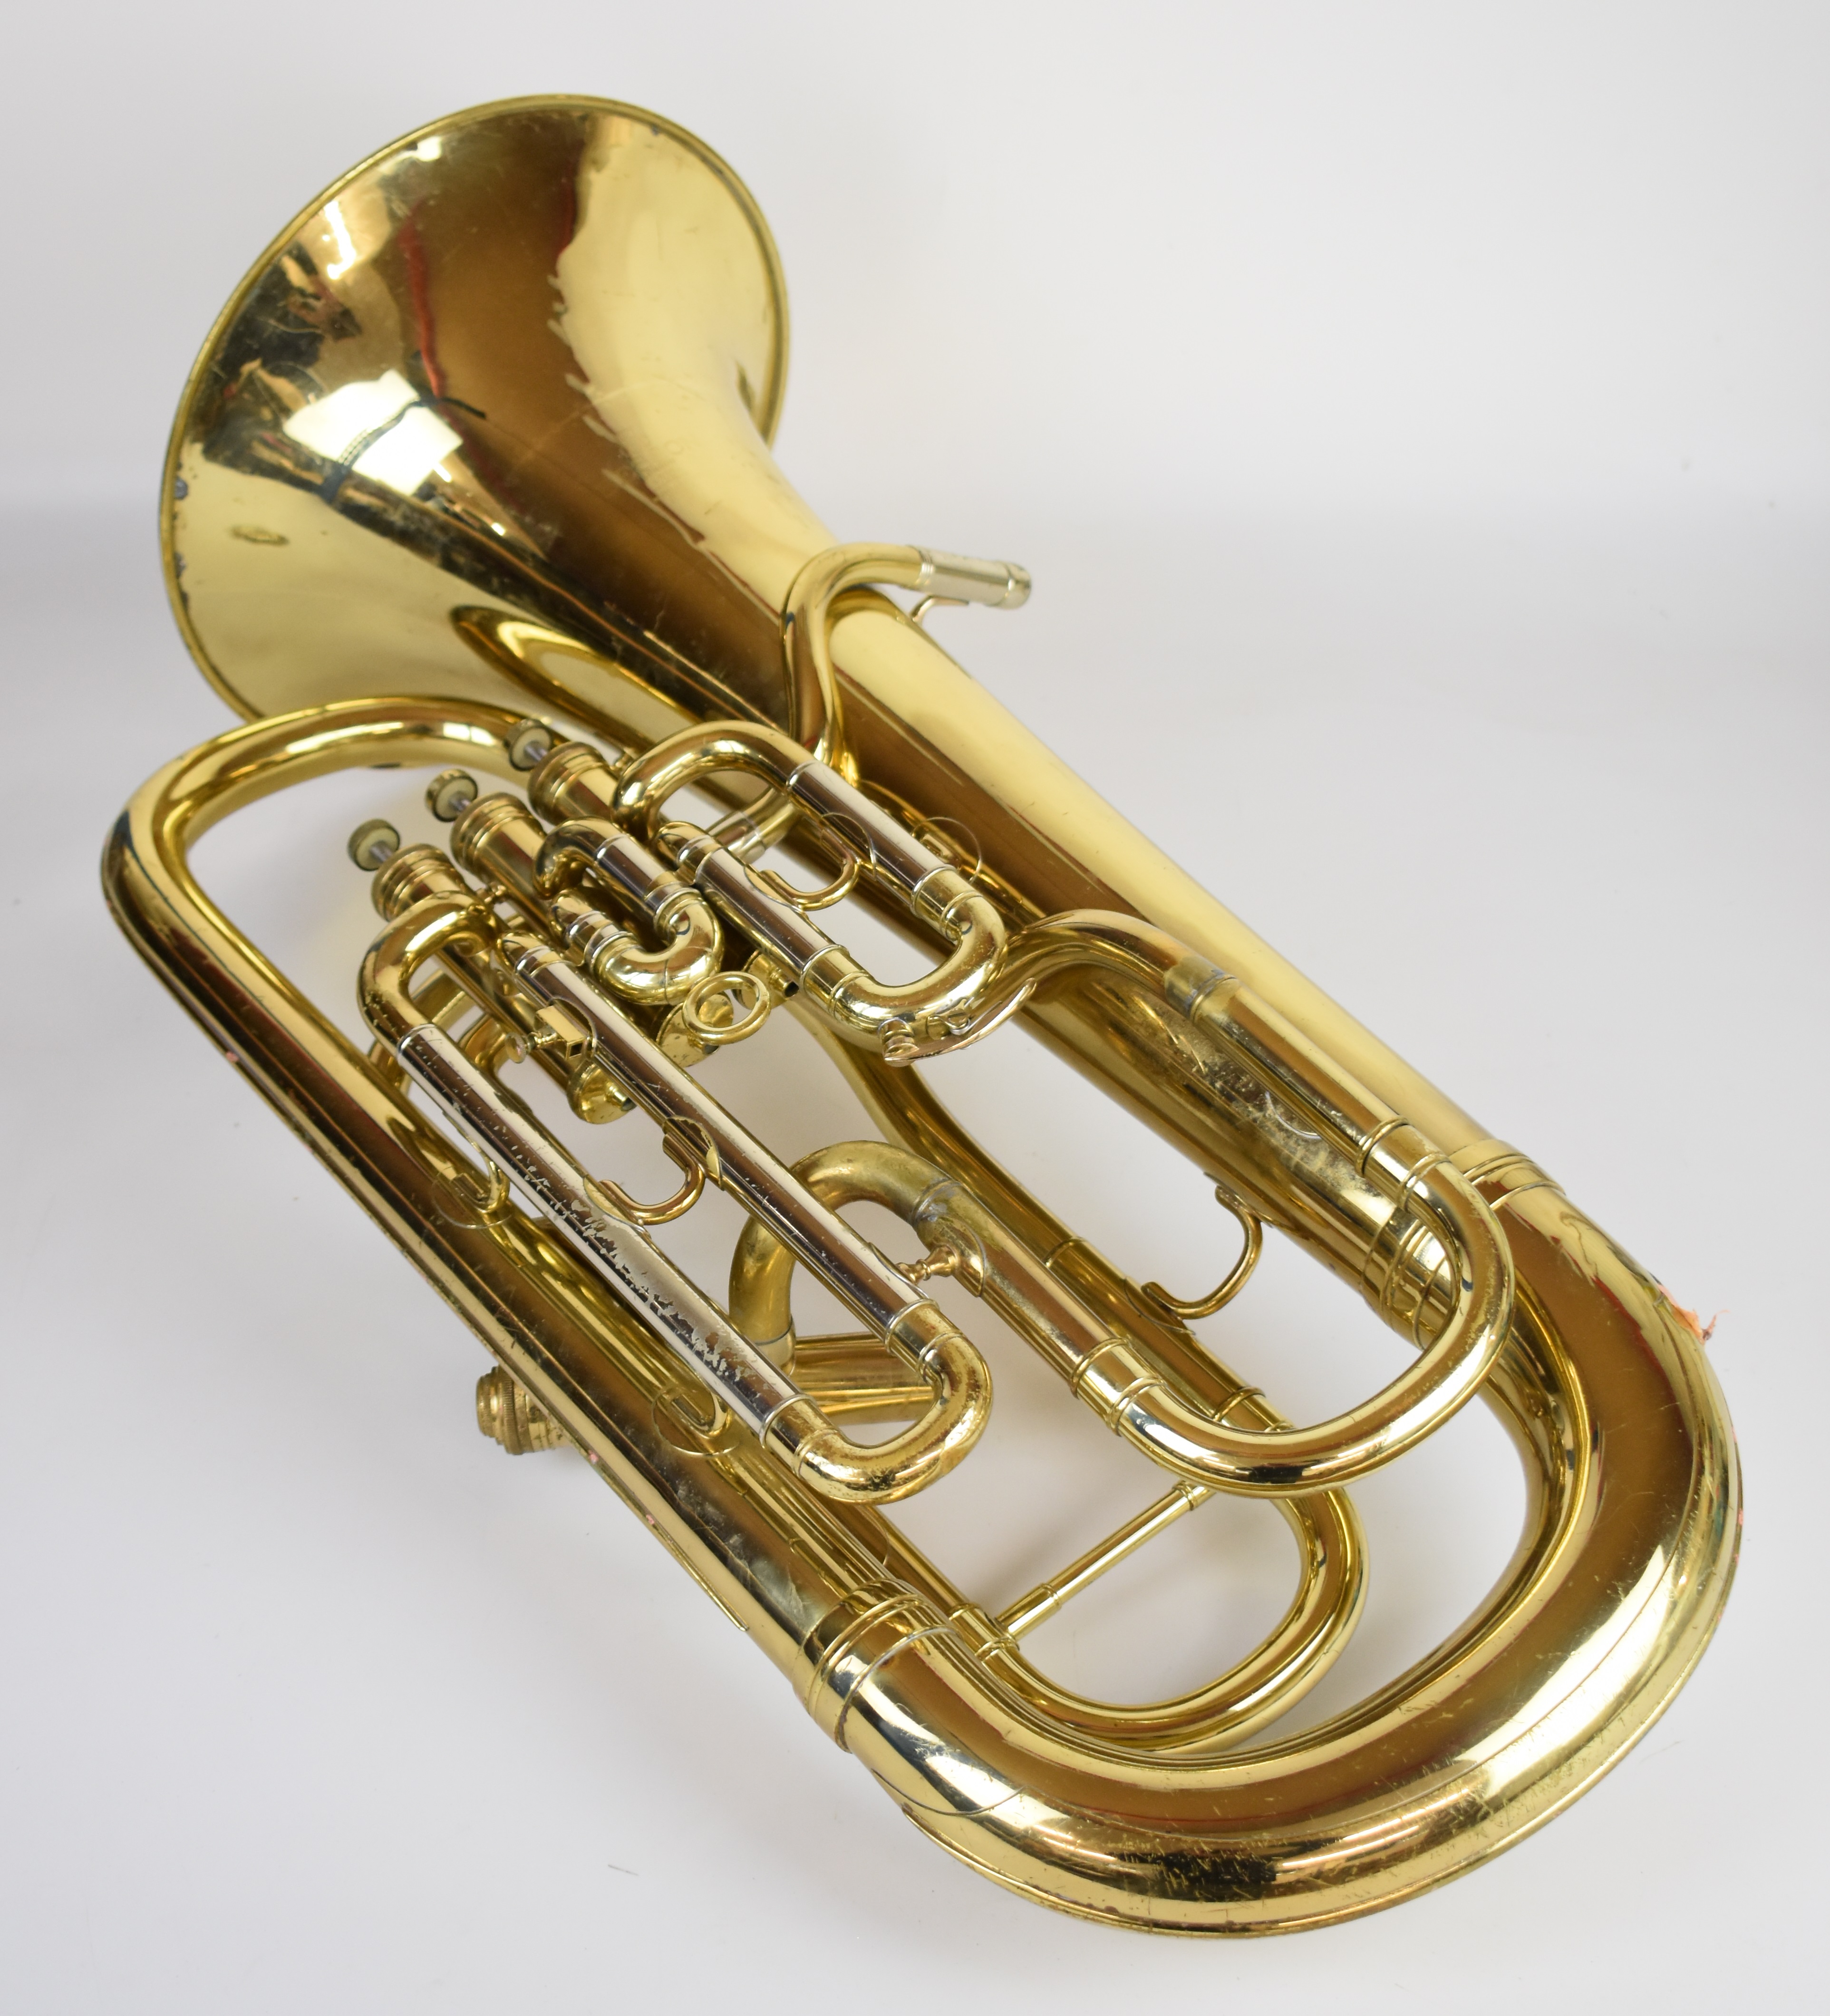 Boosey & Hawkes Besson 700 brass Euphonium, serial no. 765-718418, in fitted hard shell case with